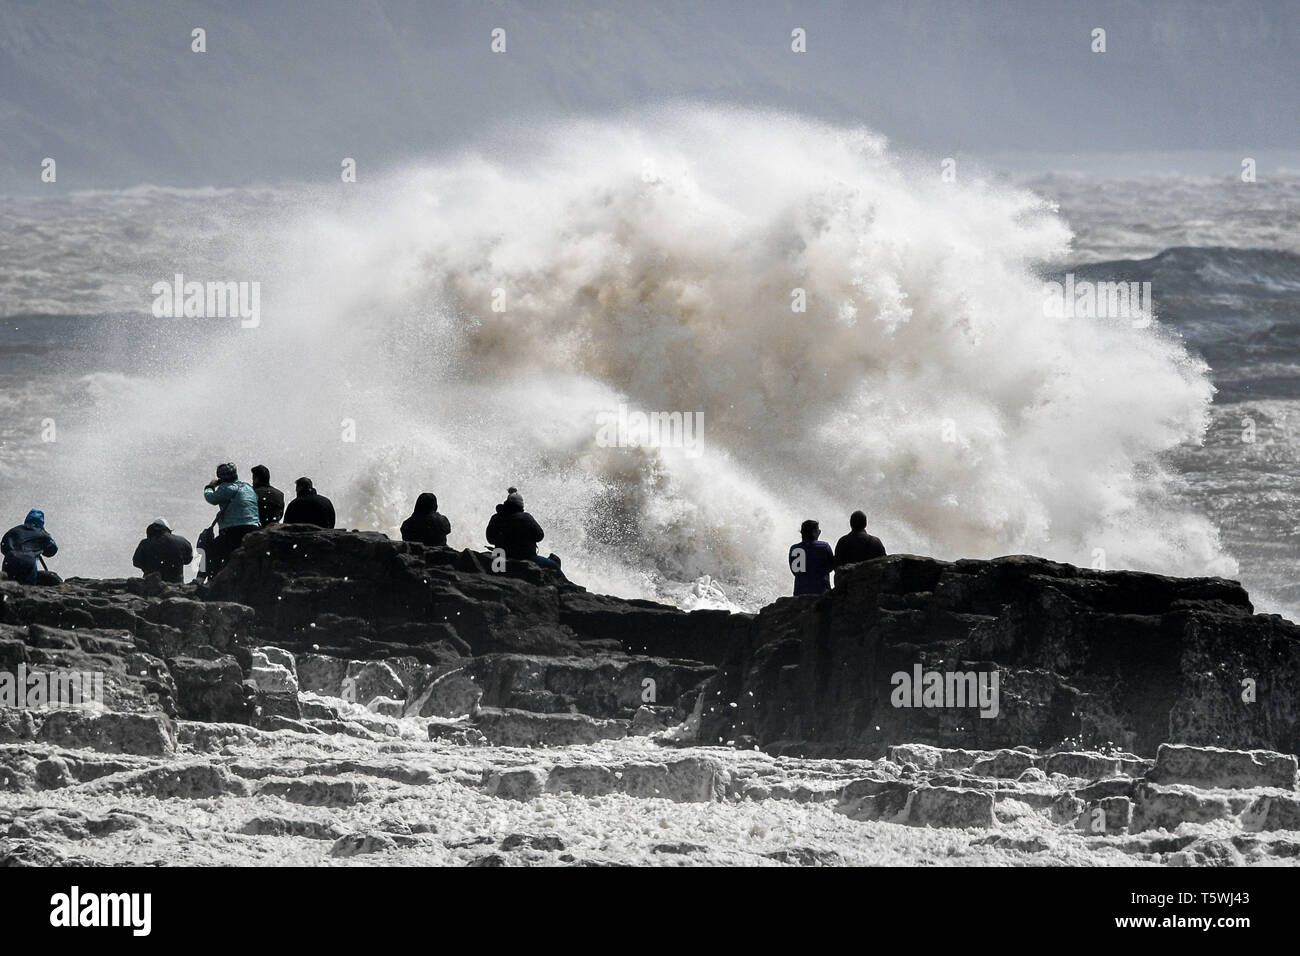 People watch huge stormy waves crash against the shore at Porthcawl, Wales, where Storm Hannah is creating extremely strong gusts of wind. Stock Photo